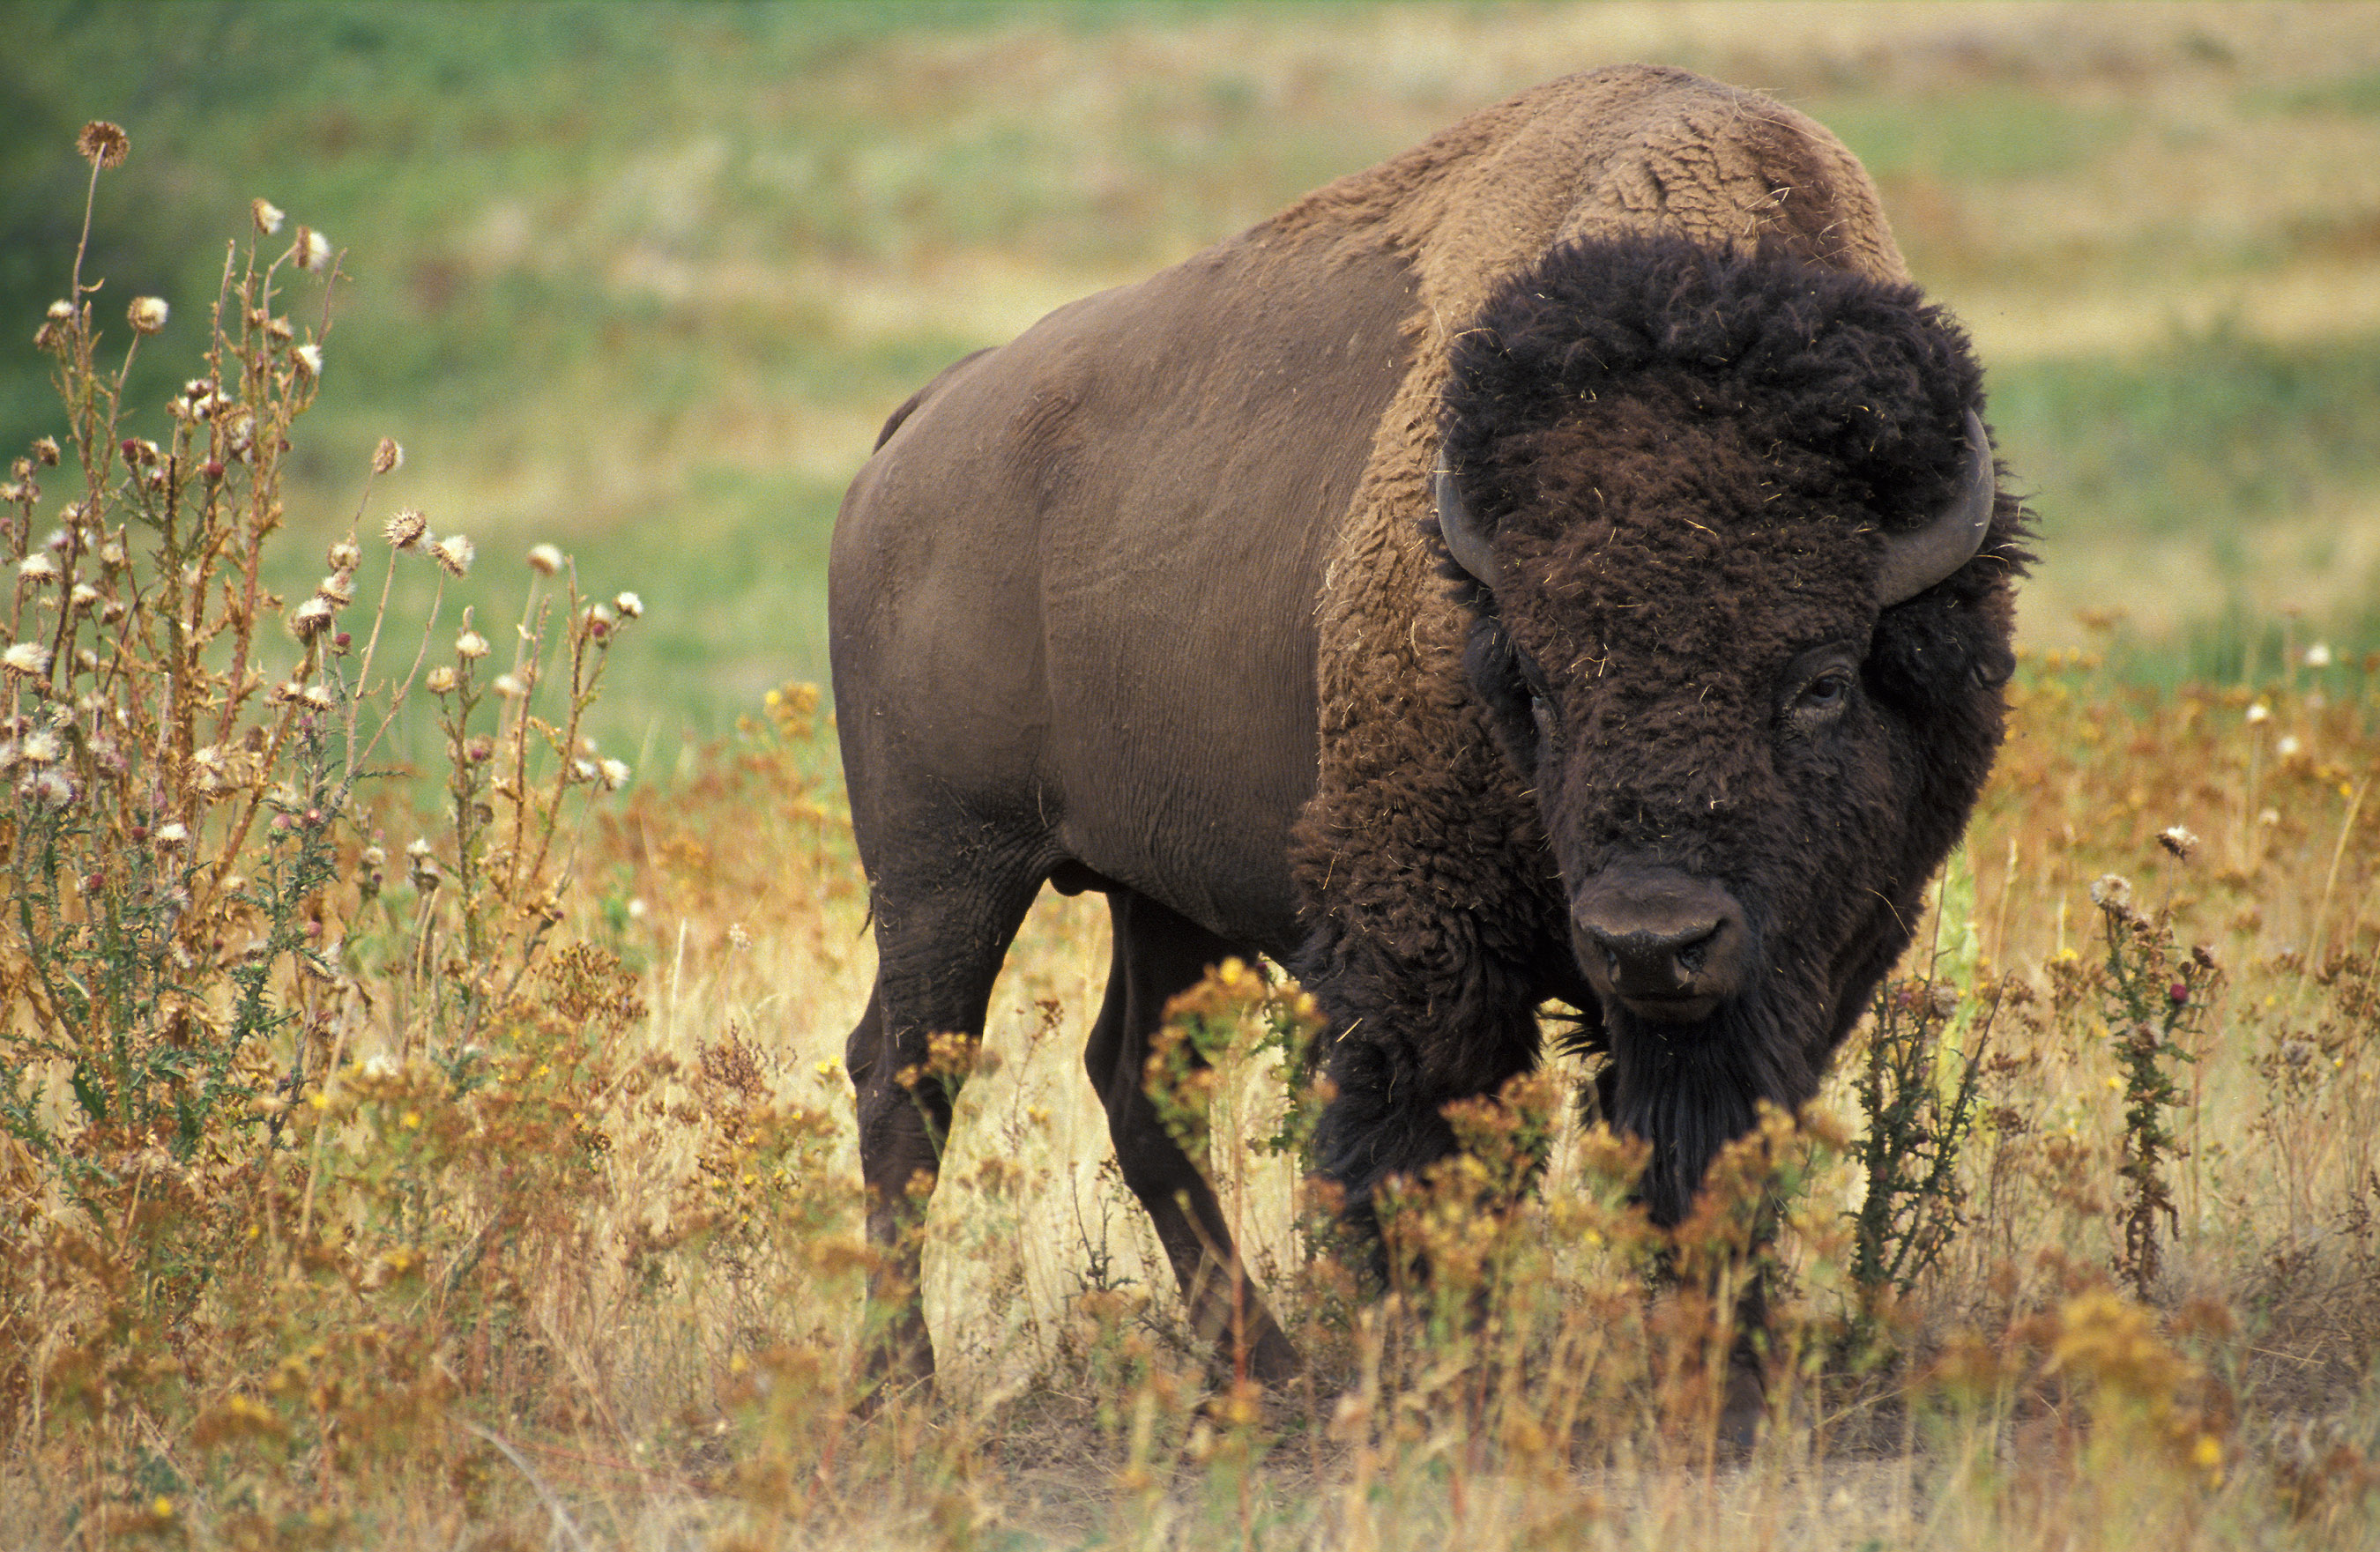 AGRICULTURAL RESEARCH SERVICE | PHOTO COURTESY Both the U.S. Senate and the U.S. House of Representatives have passed bills to recognize the American bison as the national mammal of the United States.